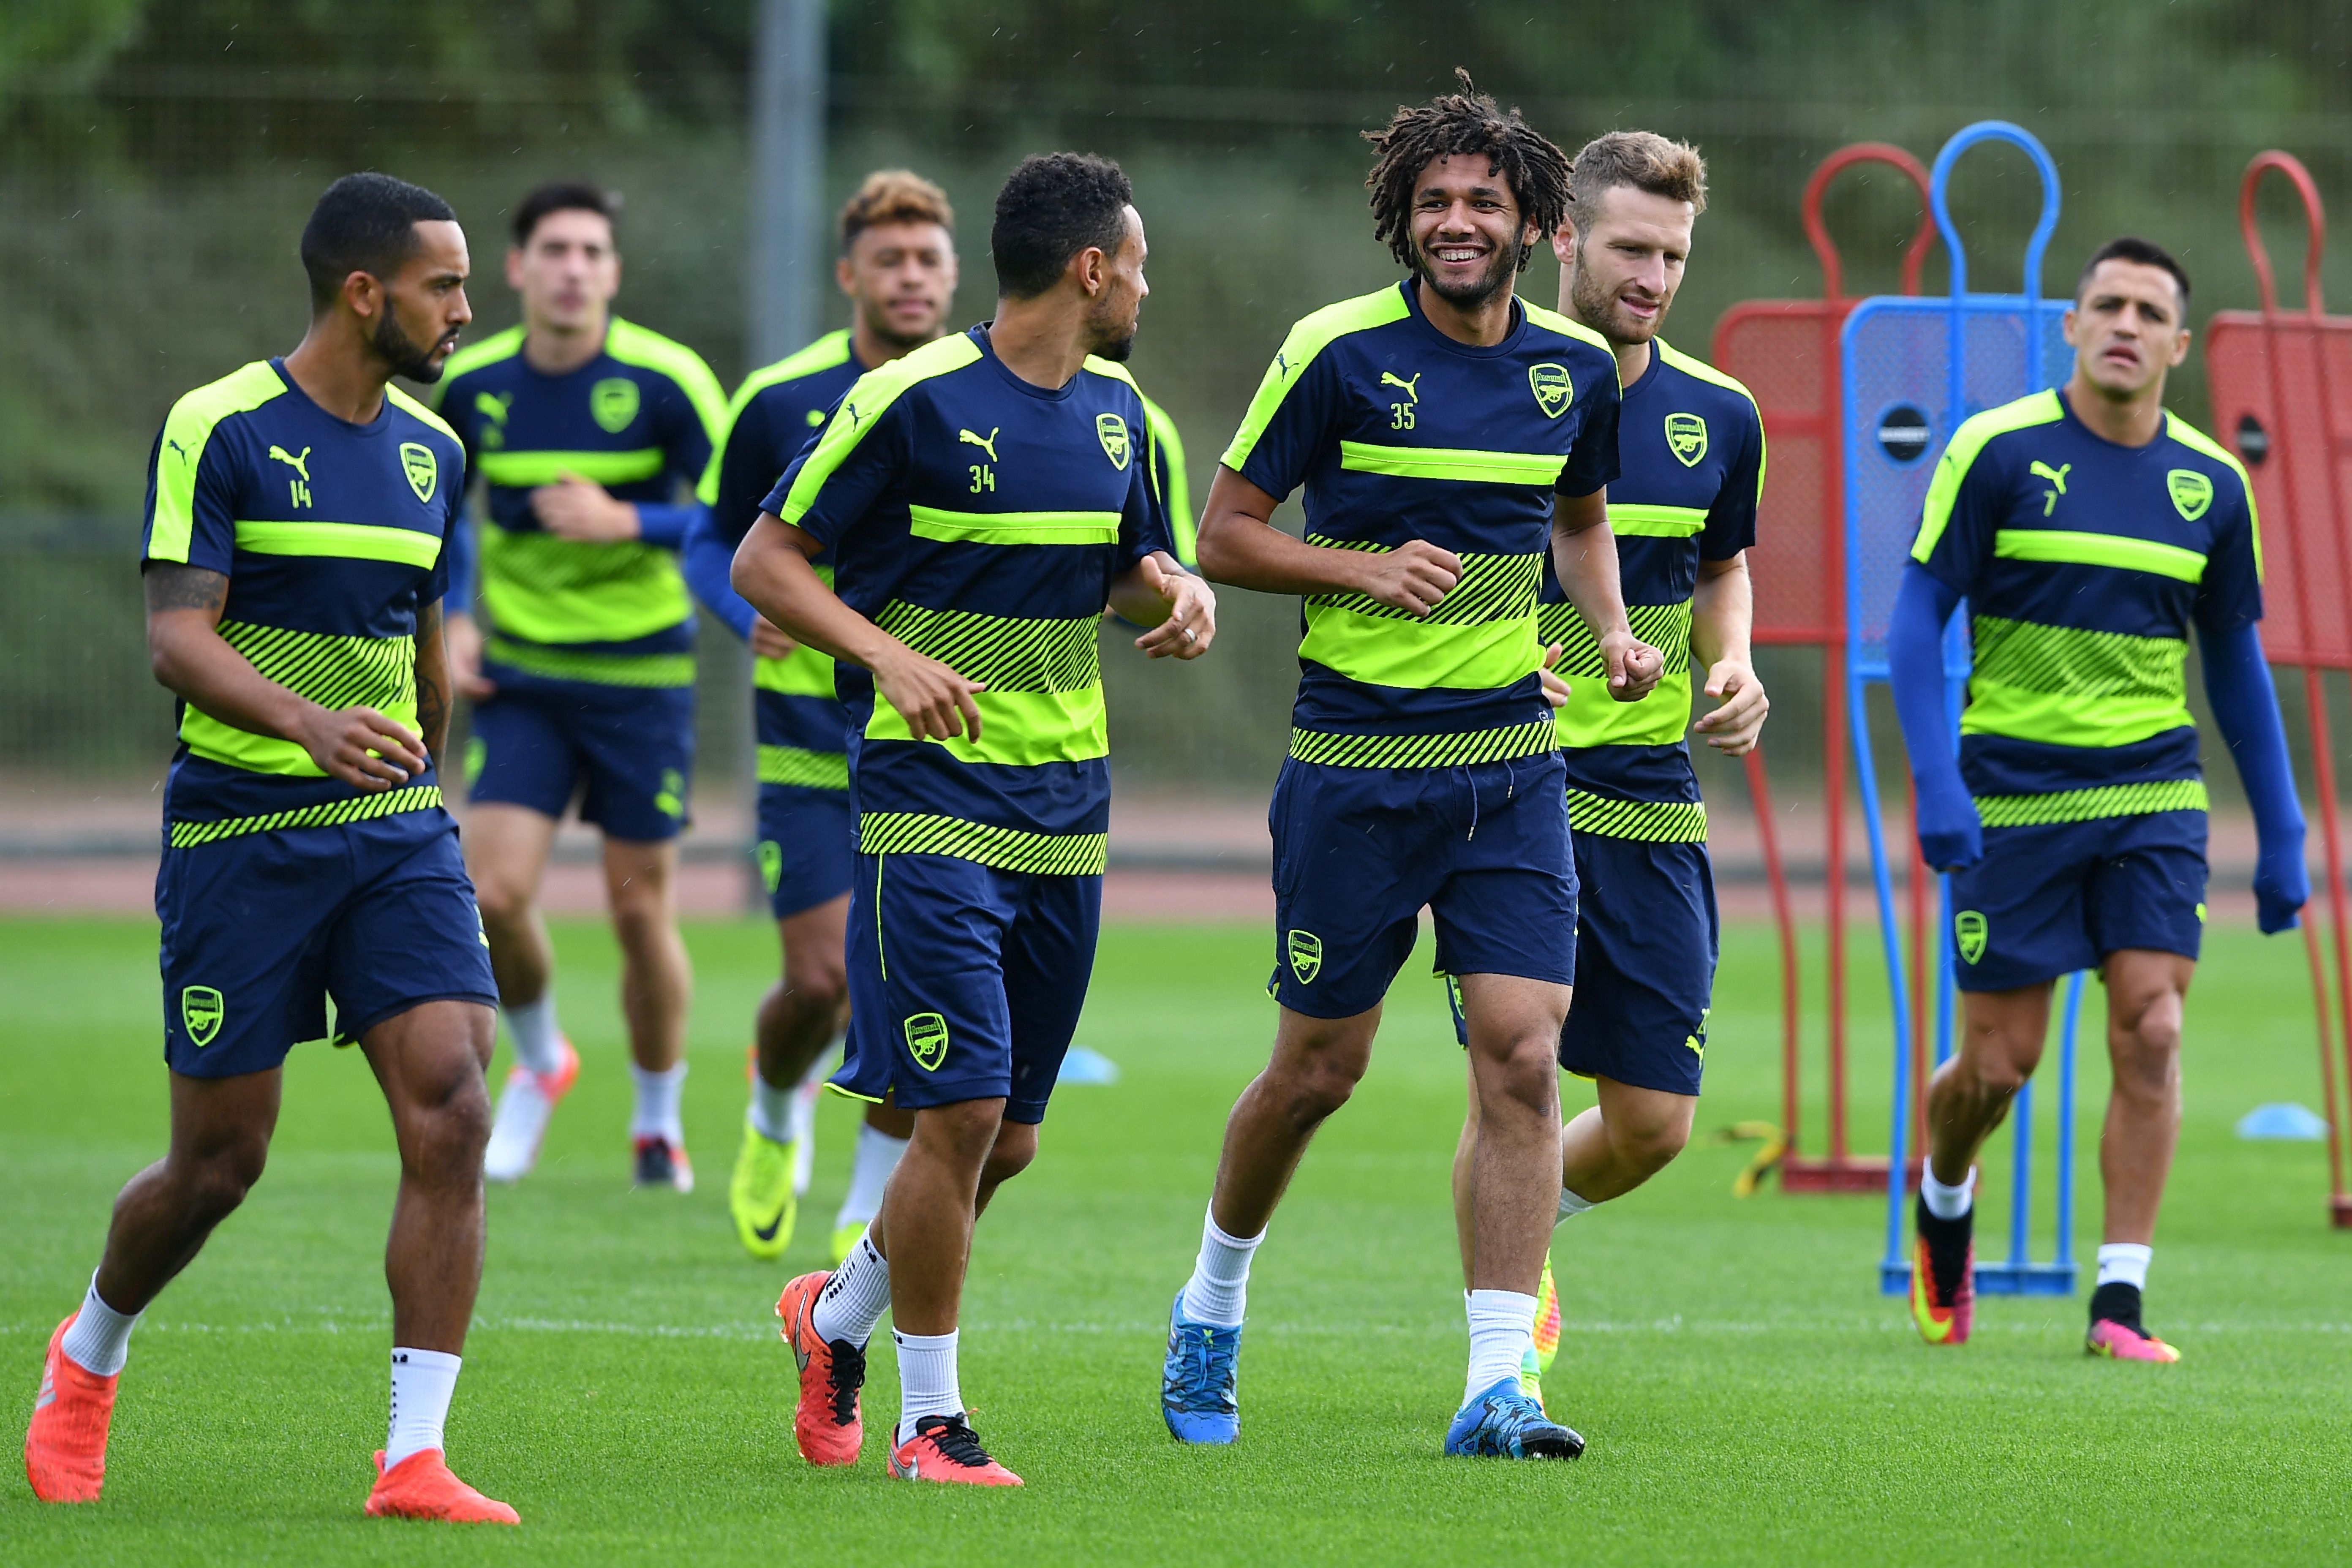 Arsenal's Egyptian midfielder Mohamed Elneny (3R) takes part in a training session at Arsenal's London Colney training ground on September 12, 2016 ahead of their UEFA Champions League group A match against Paris Saint-Germain. / AFP / BEN STANSALL        (Photo credit should read BEN STANSALL/AFP/Getty Images)